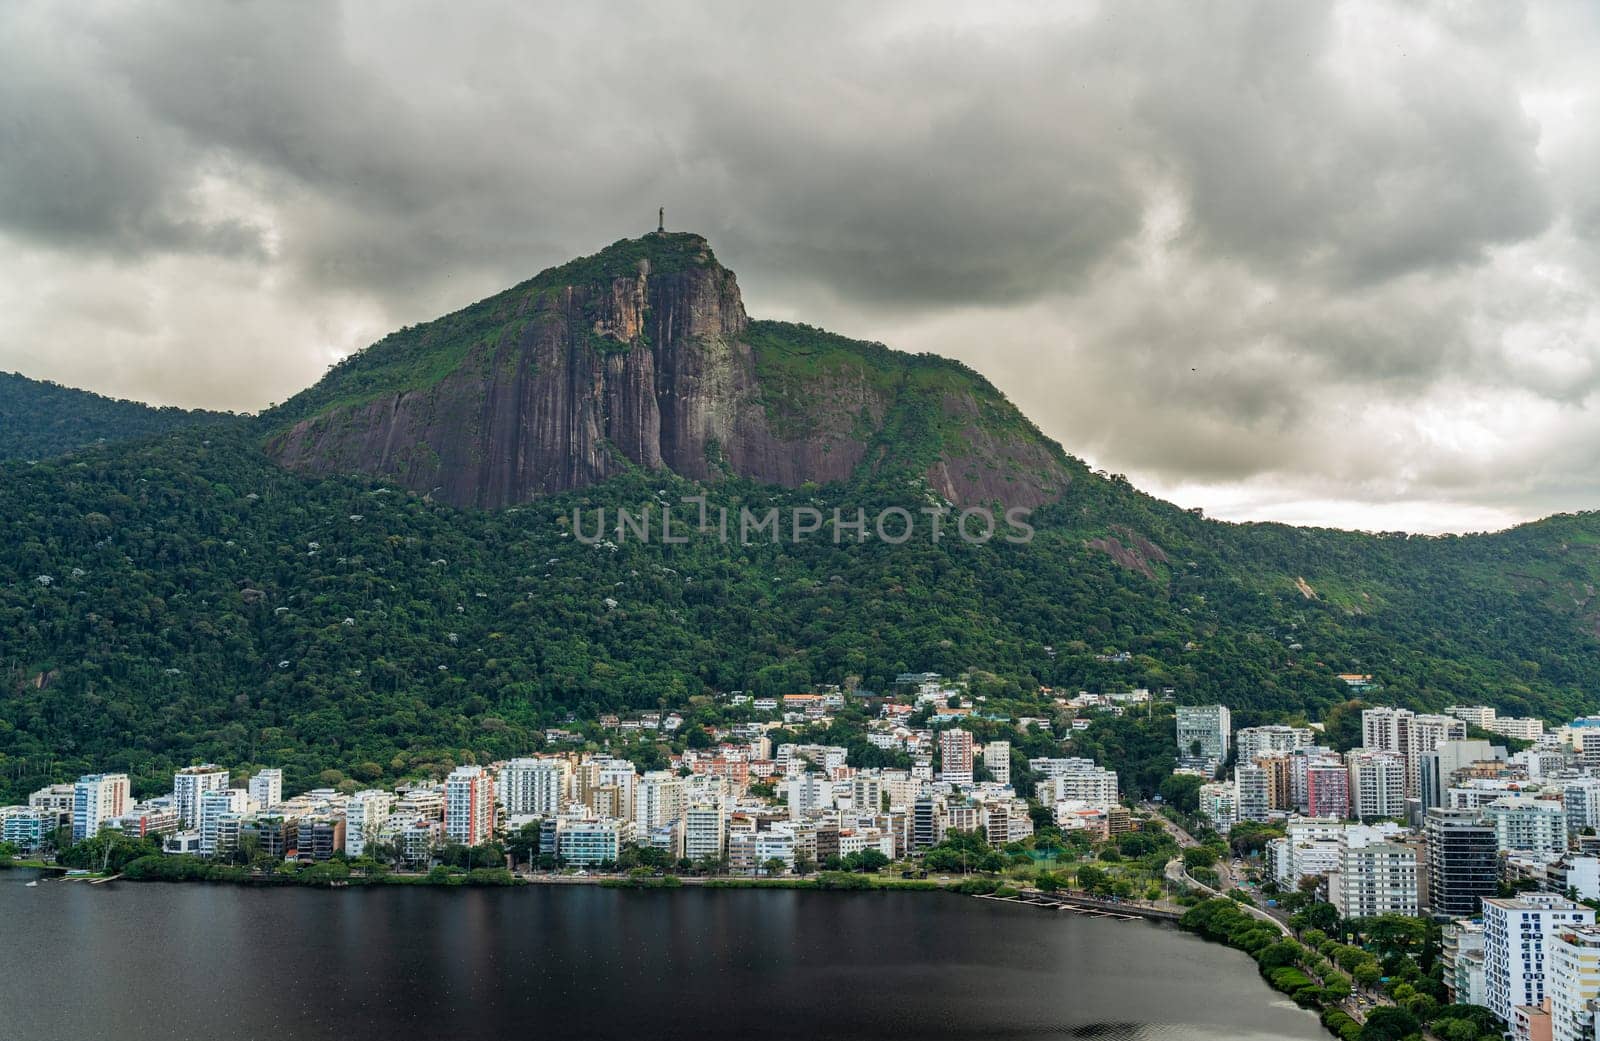 Christ the Redeemer overlooks Rio's homes among the dense jungle.